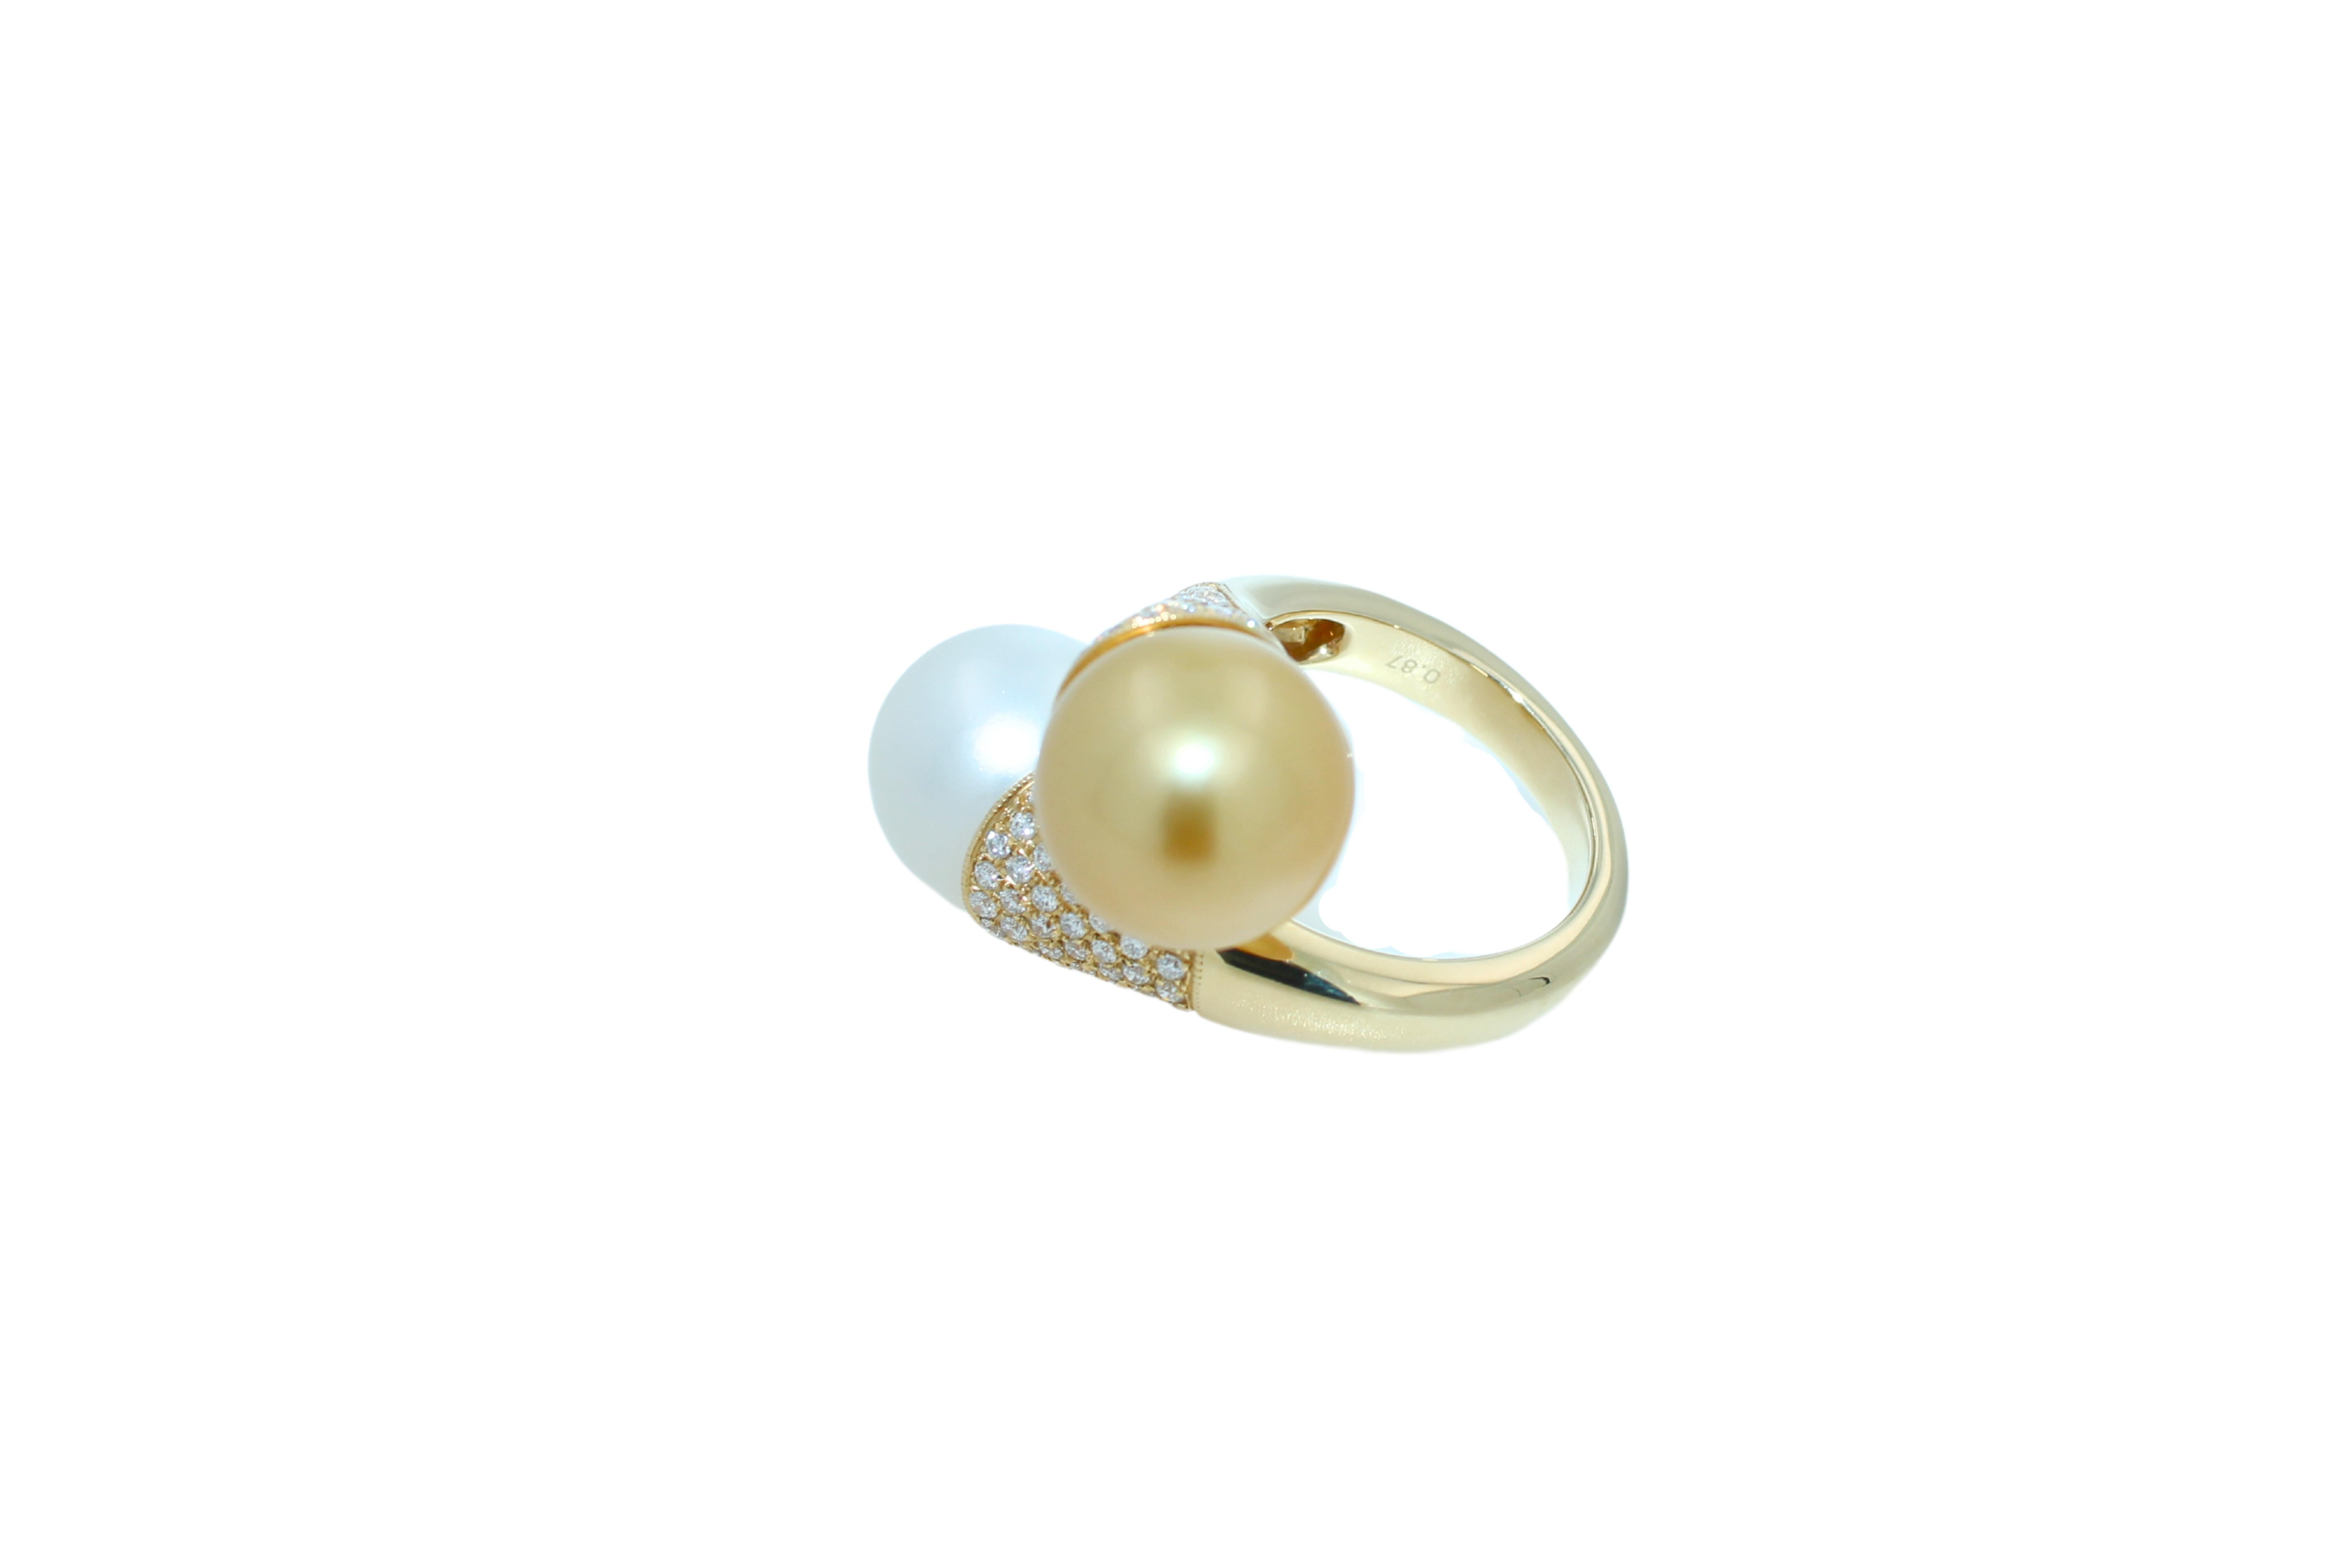 Brilliant Cut Double White Golden Yellow South Seawater Pearl Diamond Pave 14 Karat Gold Ring For Sale